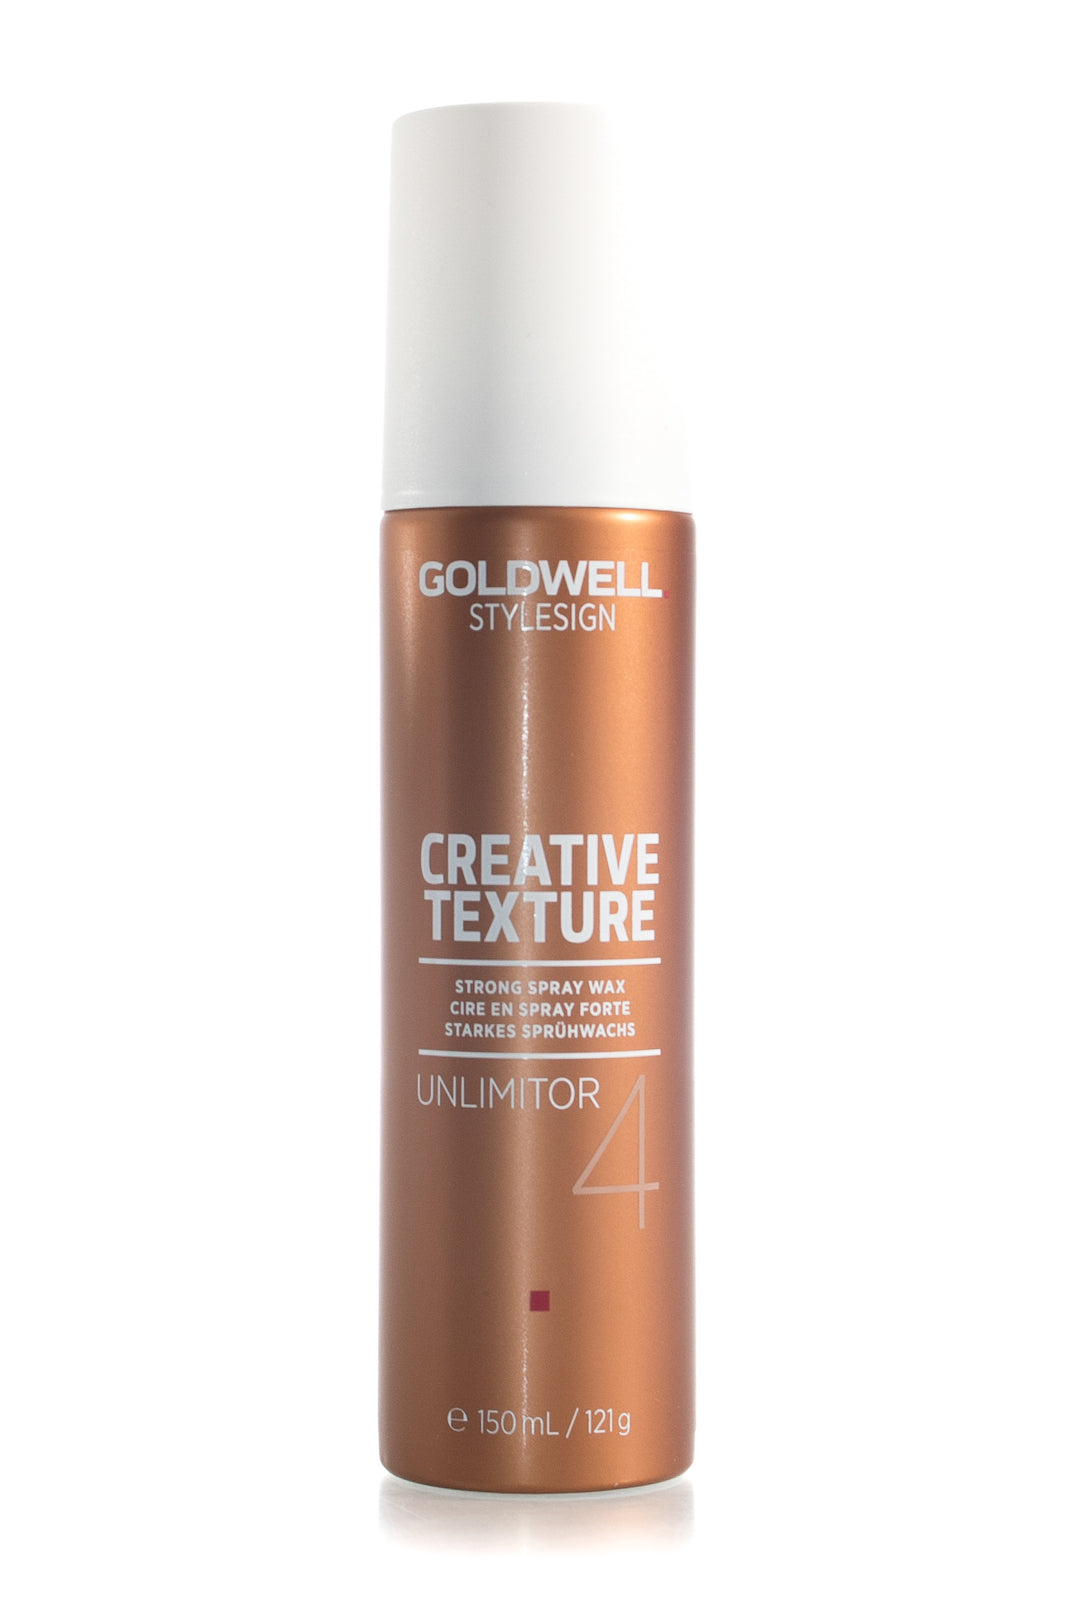 Product Image: Goldwell Creative Texture Unlimitor - 150ml